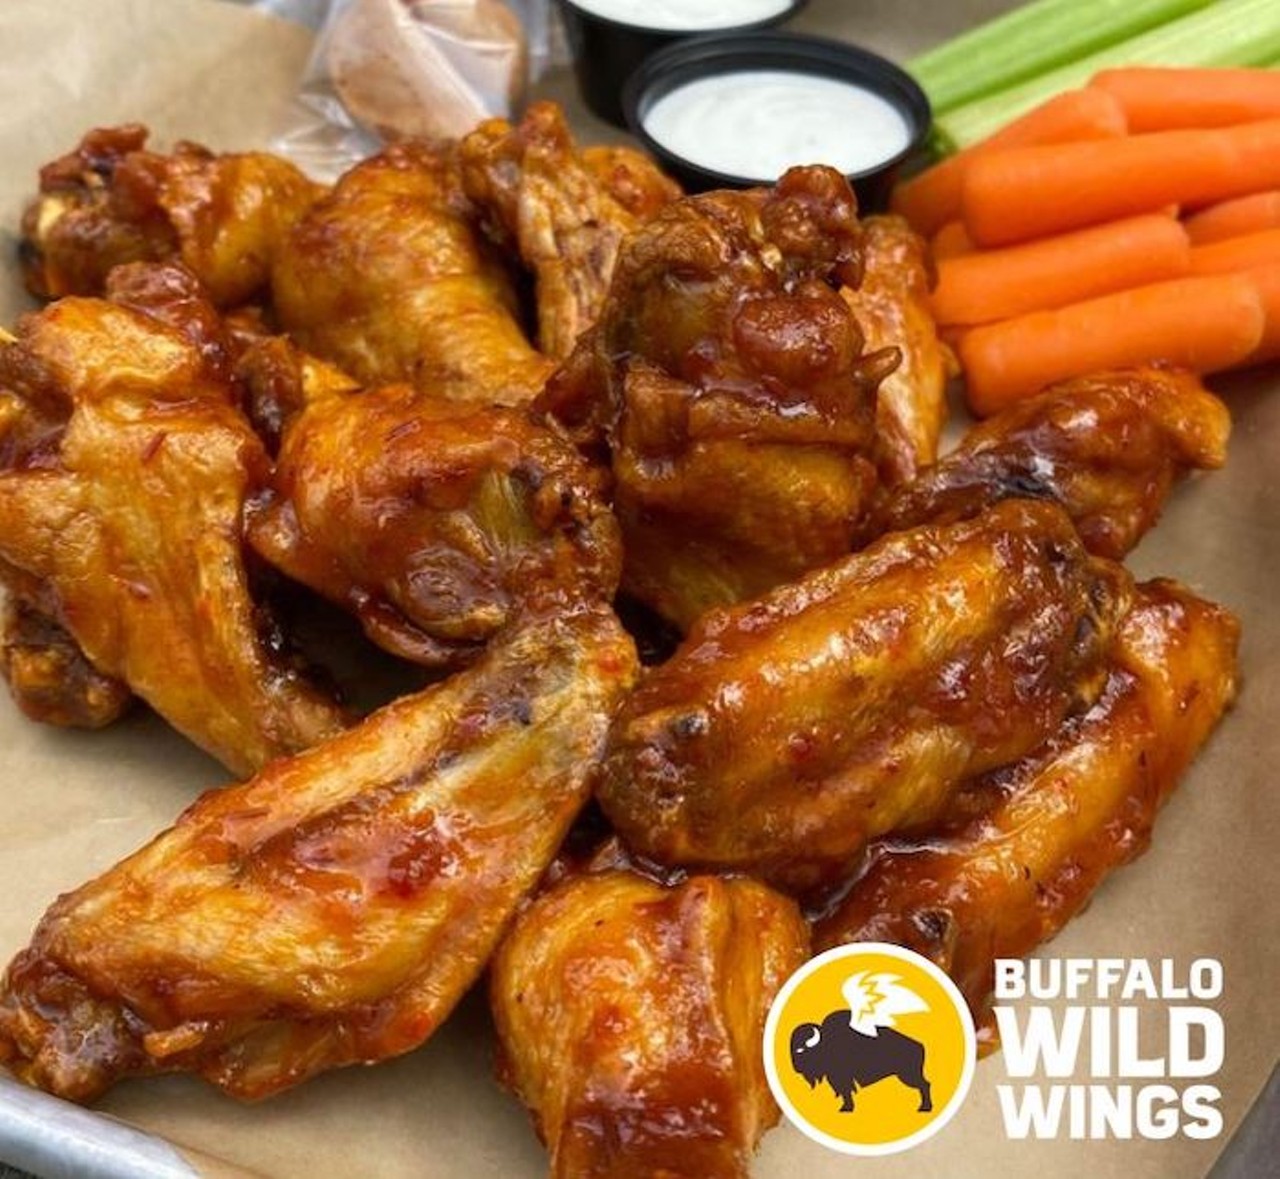  Buffalo Wild Wings
Strongsville, Ashland, Aurora, Avon Lake, Brooklyn, Canton, Cleveland (Downtown), Cleveland Heights, Elyria, Fairview Park, Kent, Lyndhurst, Massillon, Medina, Mentor, Ontario, Sandusky, Streesboro, Warrensville Heights,, Wooster and Willoughby Locations  
Buffalo Wild Wings is offering both their traditional and boneless wings in one of their 26 famous sauces or seasonings for Wing Week.
Photo Provided by Restaurant